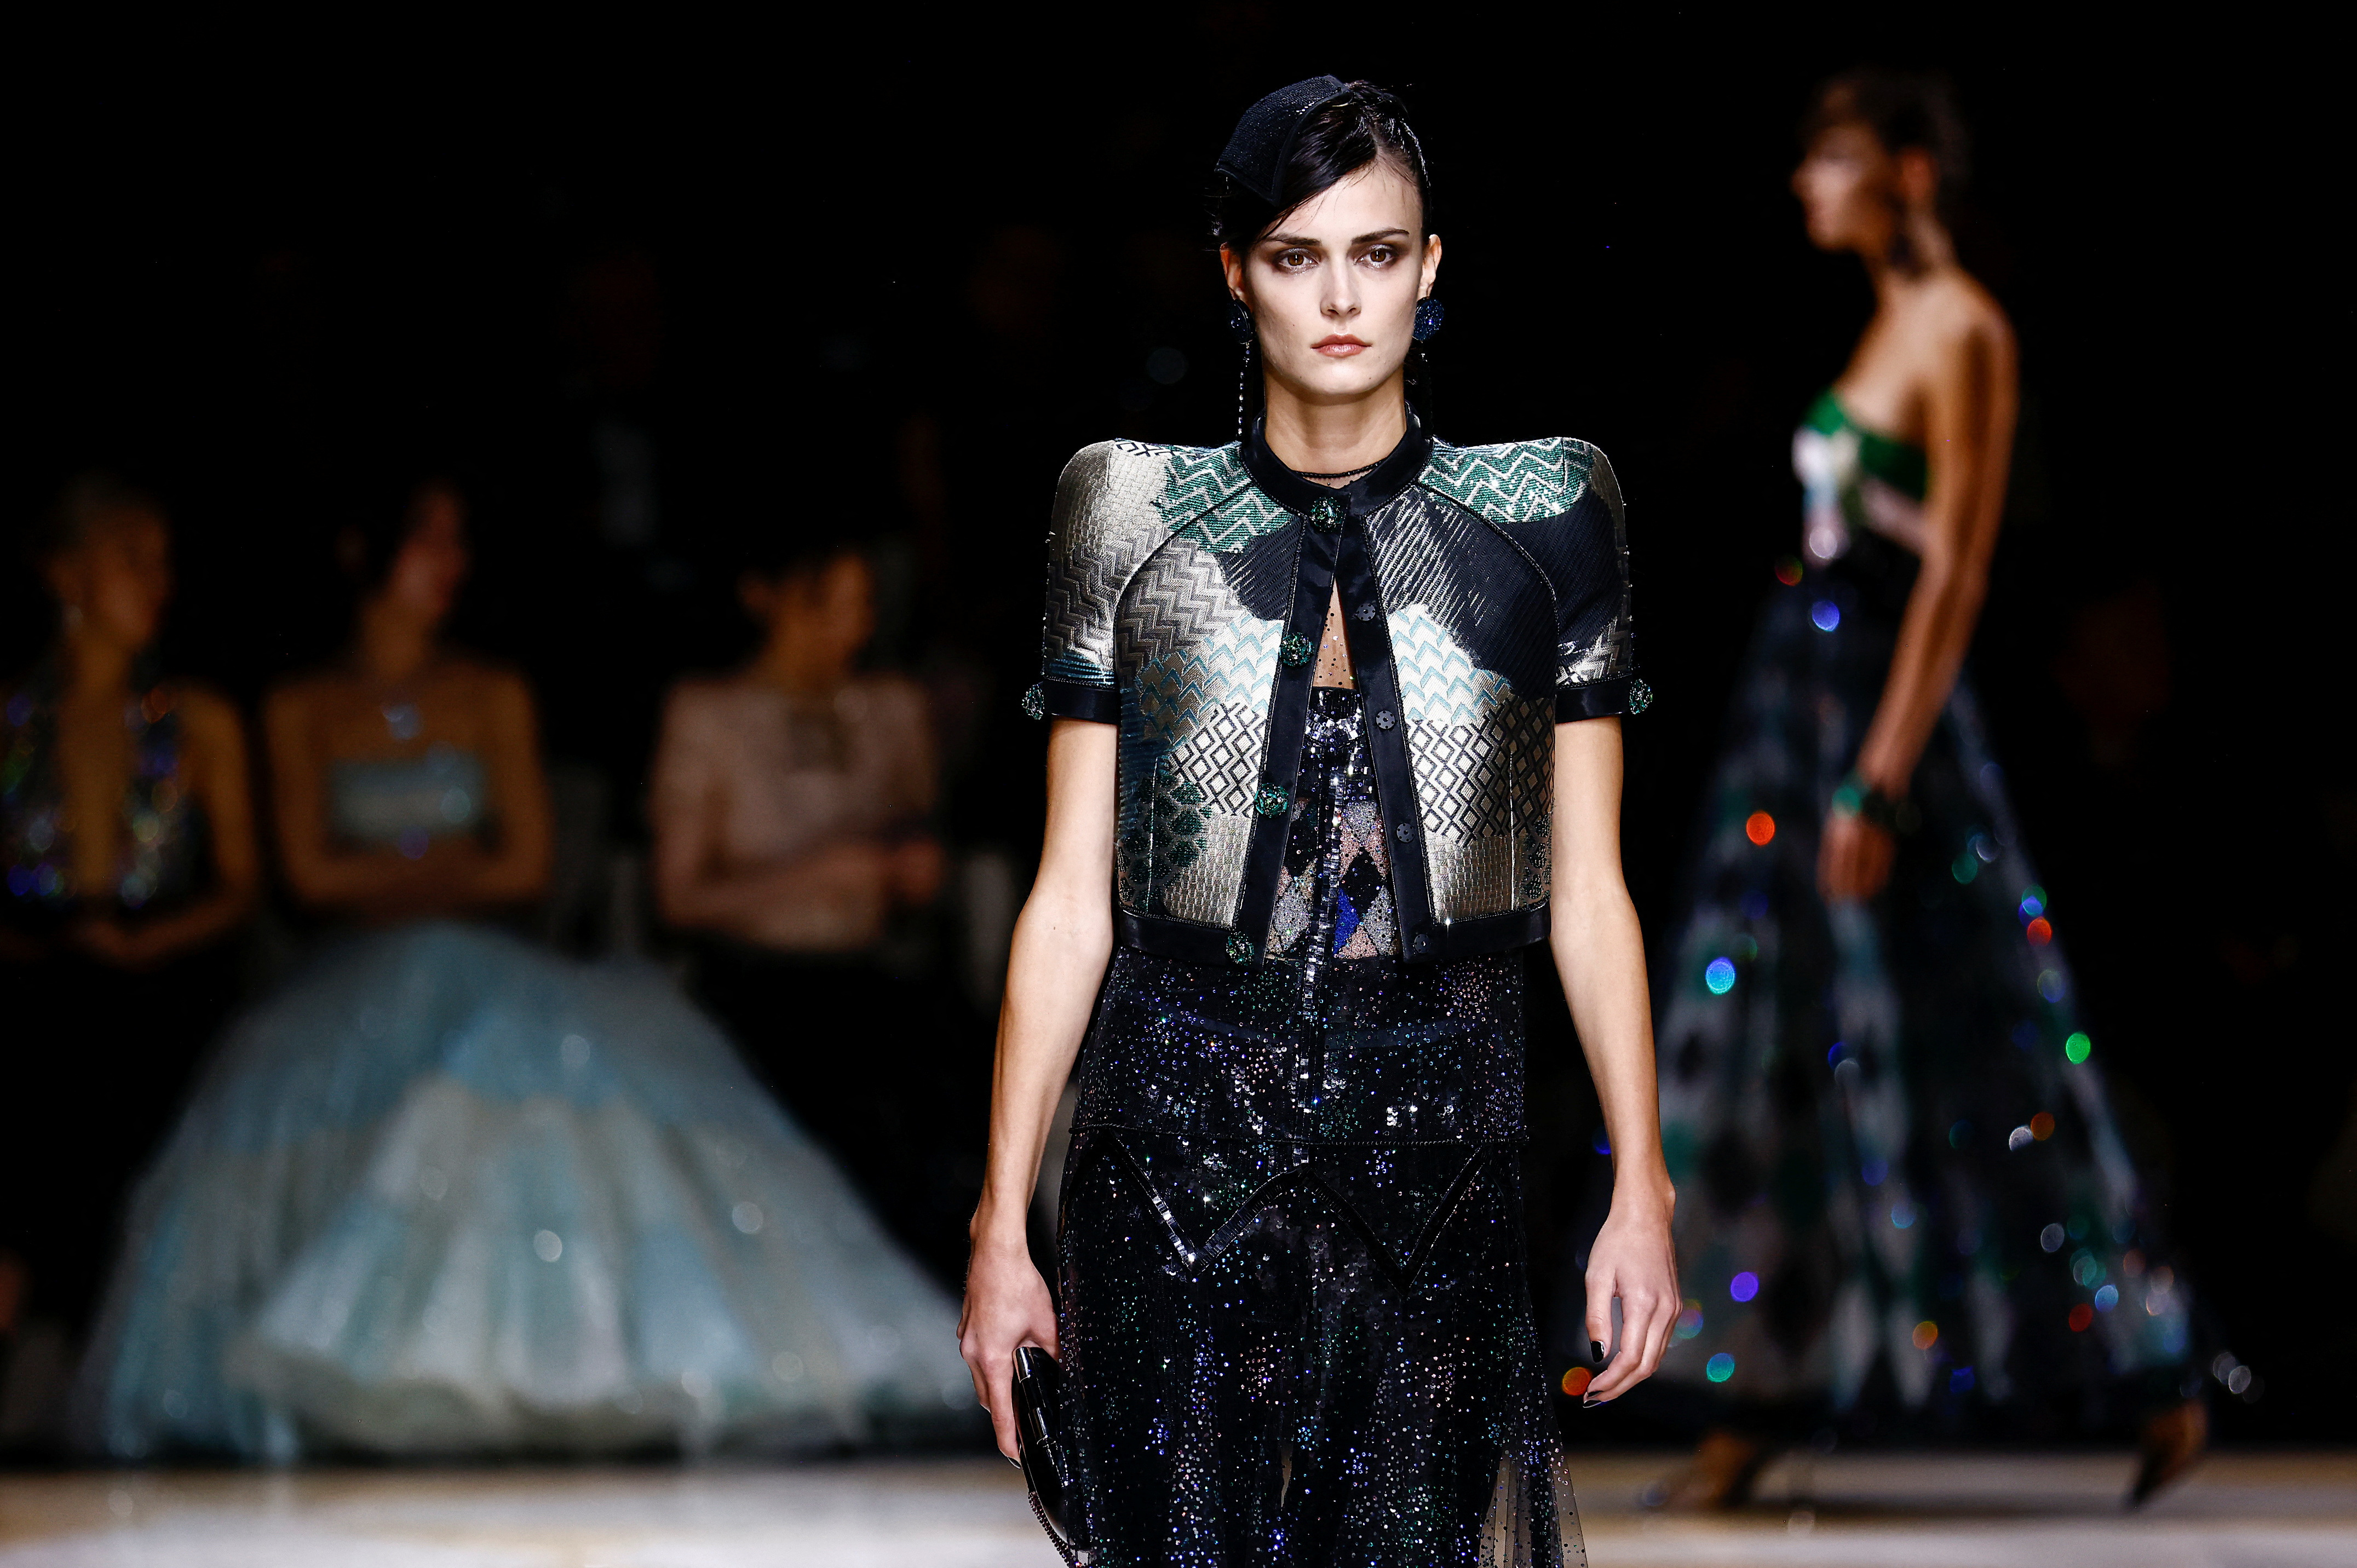 Glitz, glamor and going out: London Fashion Week returns to the spectacle